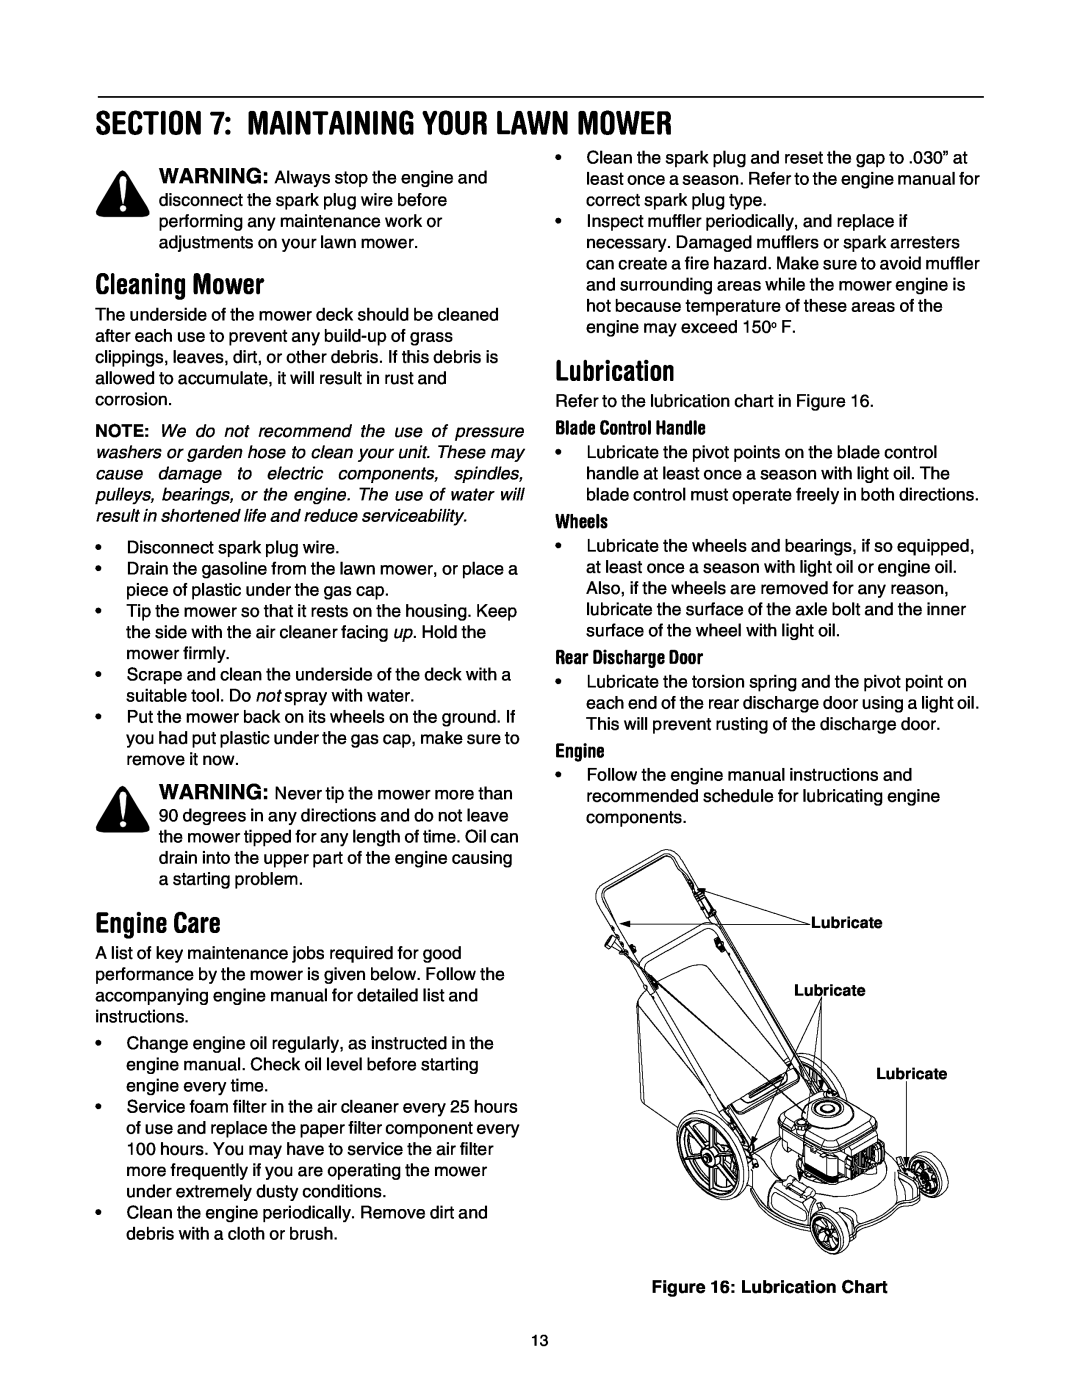 Bolens 544 manual Maintaining Your Lawn Mower, Cleaning Mower, Engine Care, Lubrication, Wheels, Rear Discharge Door 